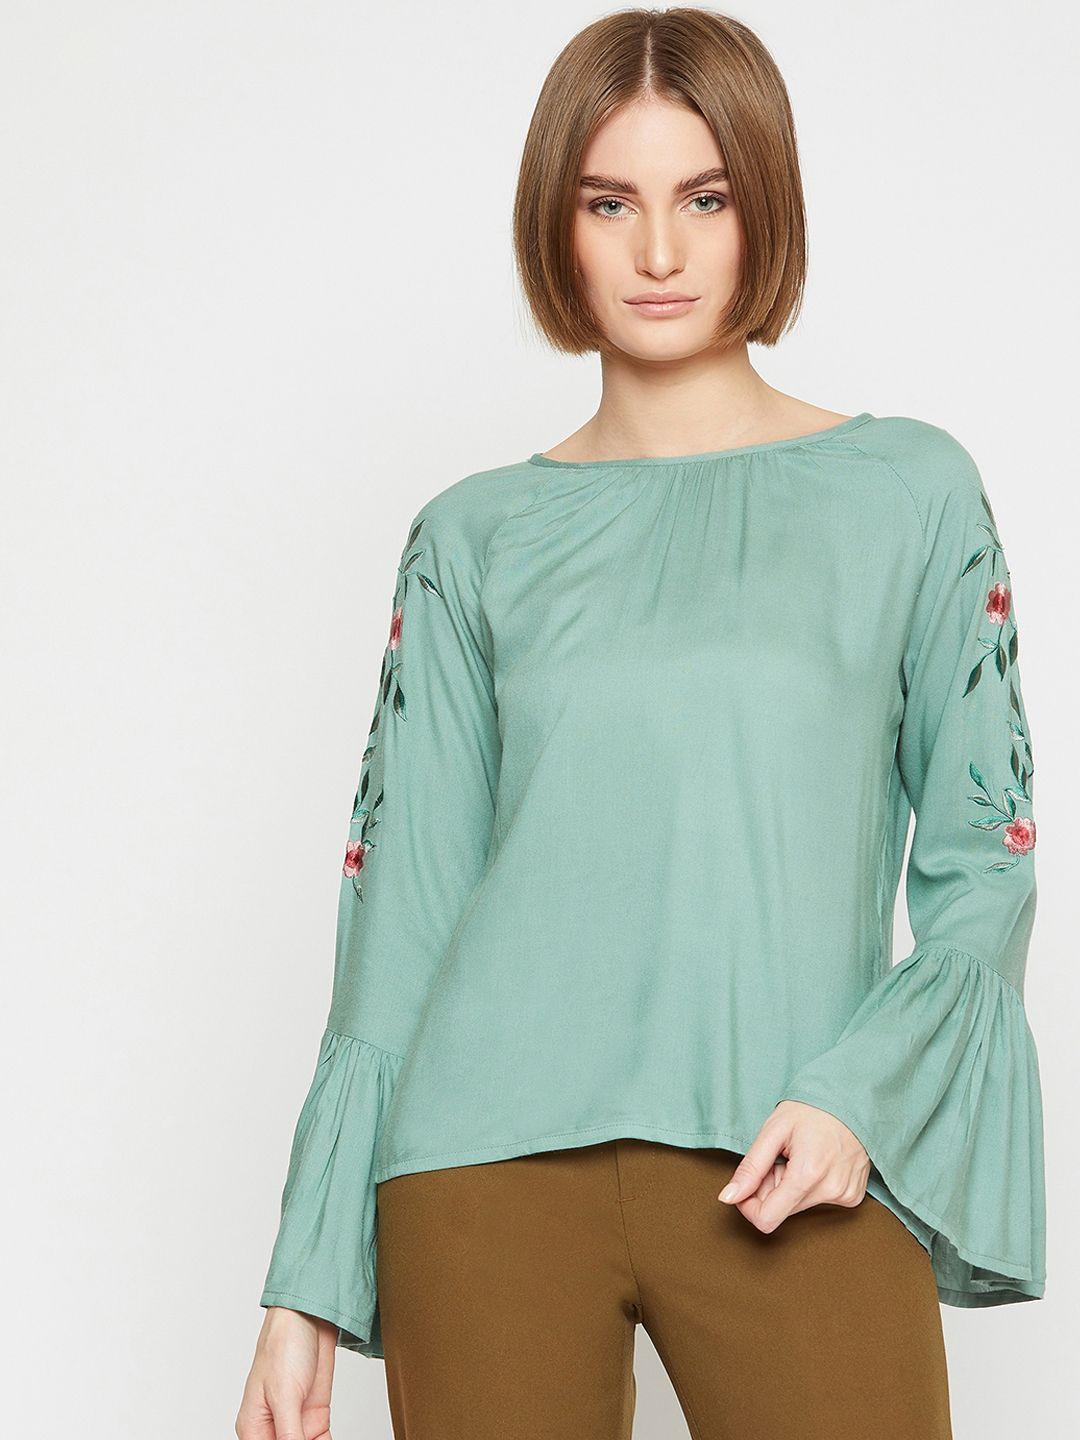 marie claire women green solid top